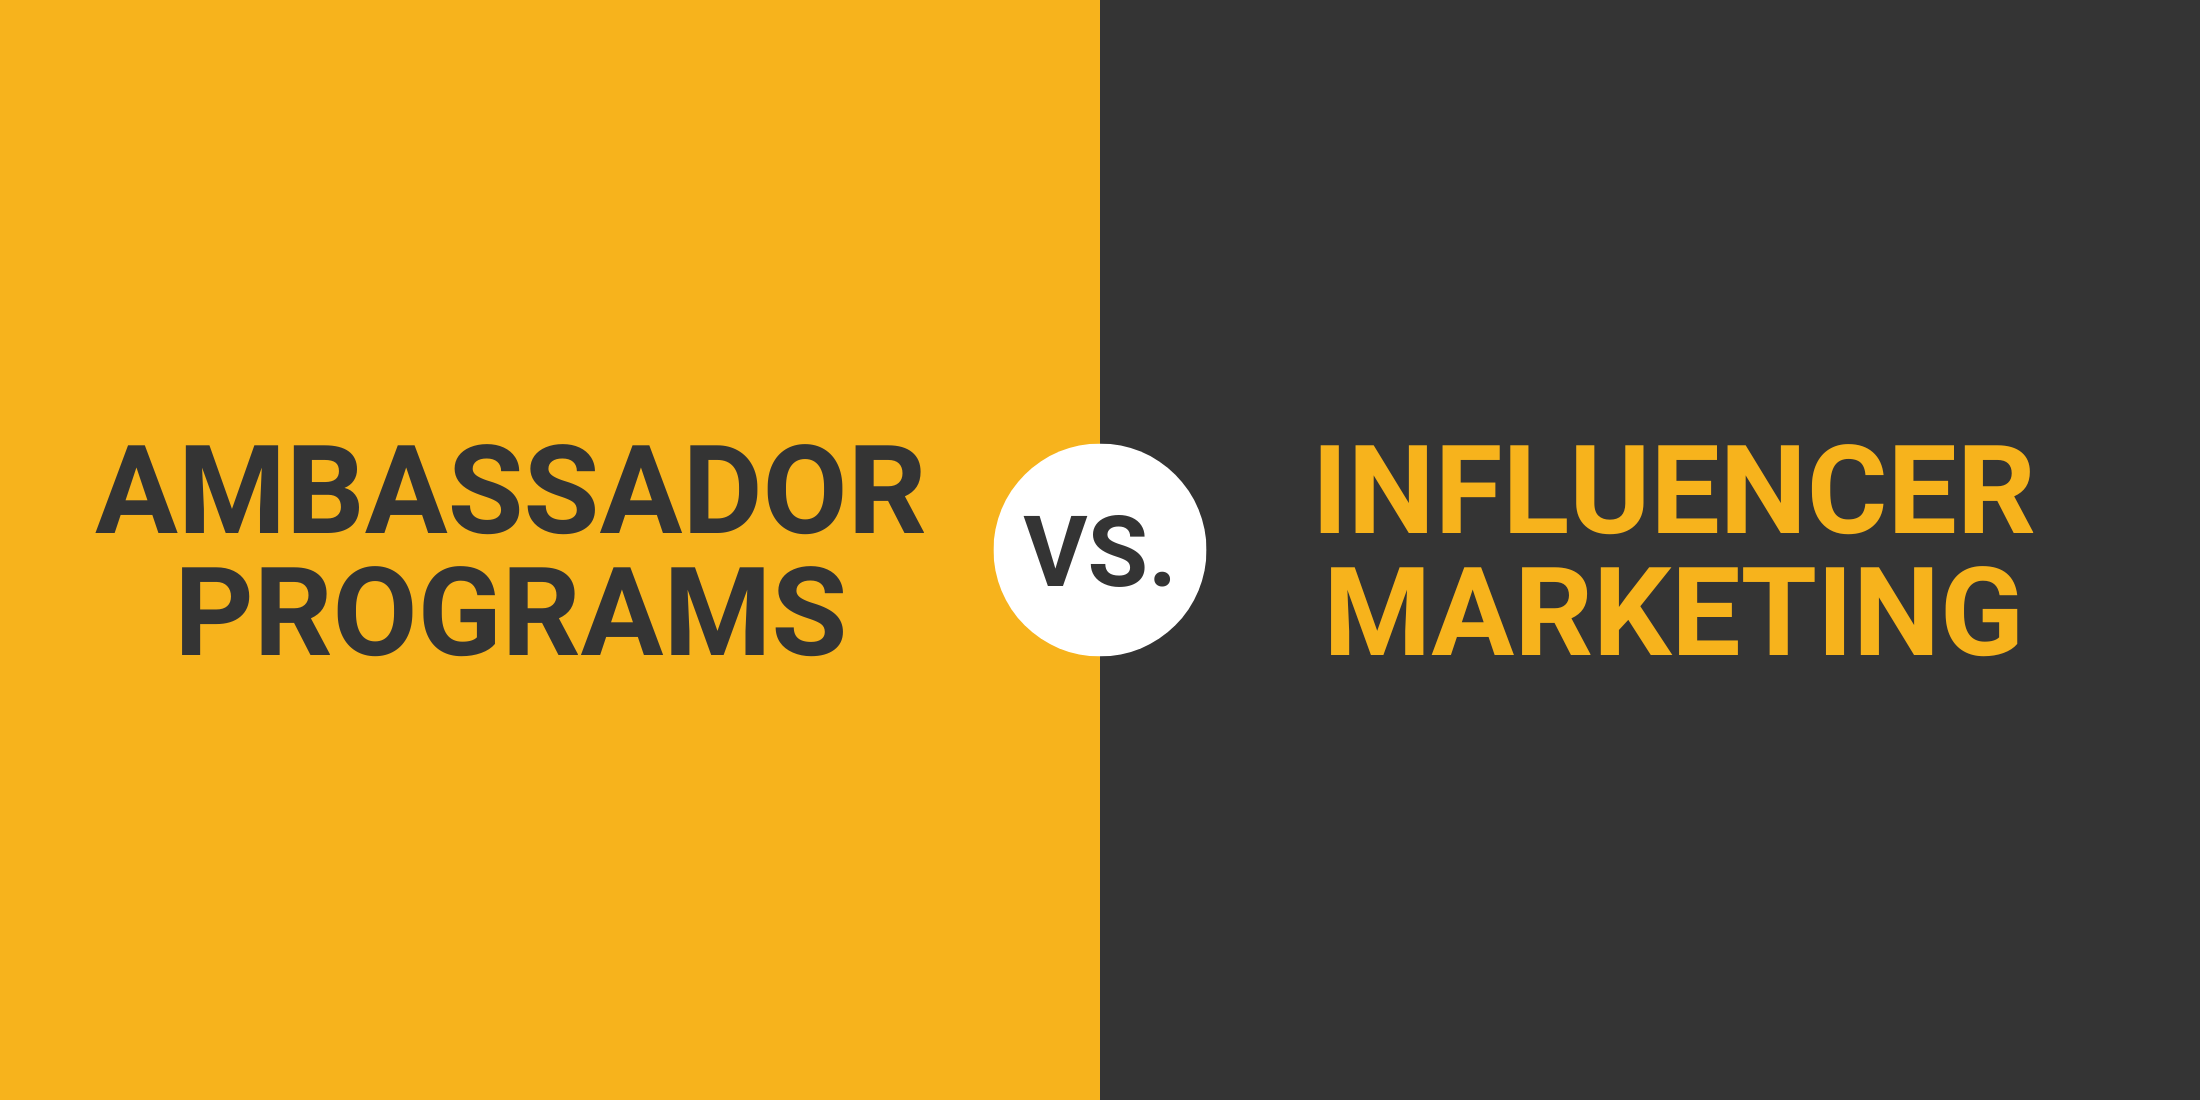 Ambassador Programs vs. Influencer Marketing: What You Need to Know